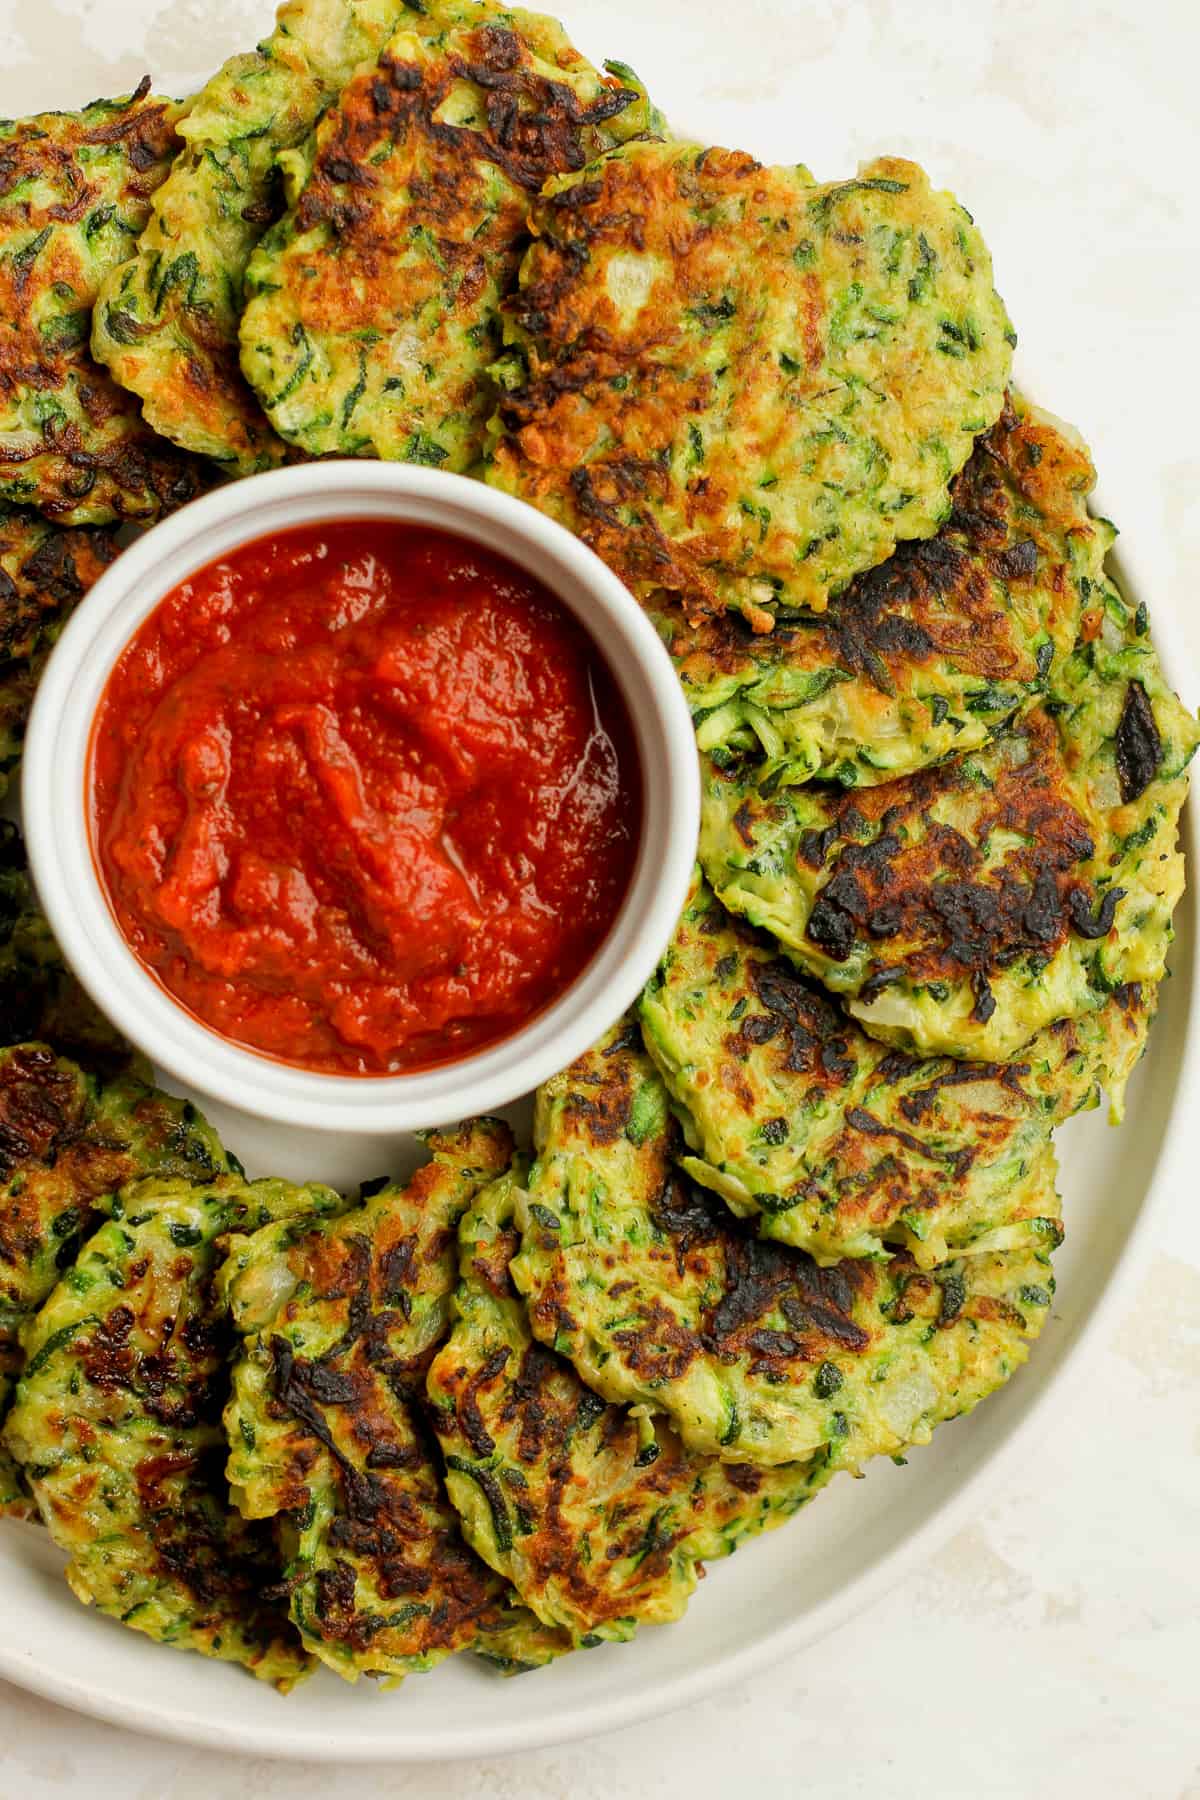 Overhead view of a plate of zucchini fritters and sauce.